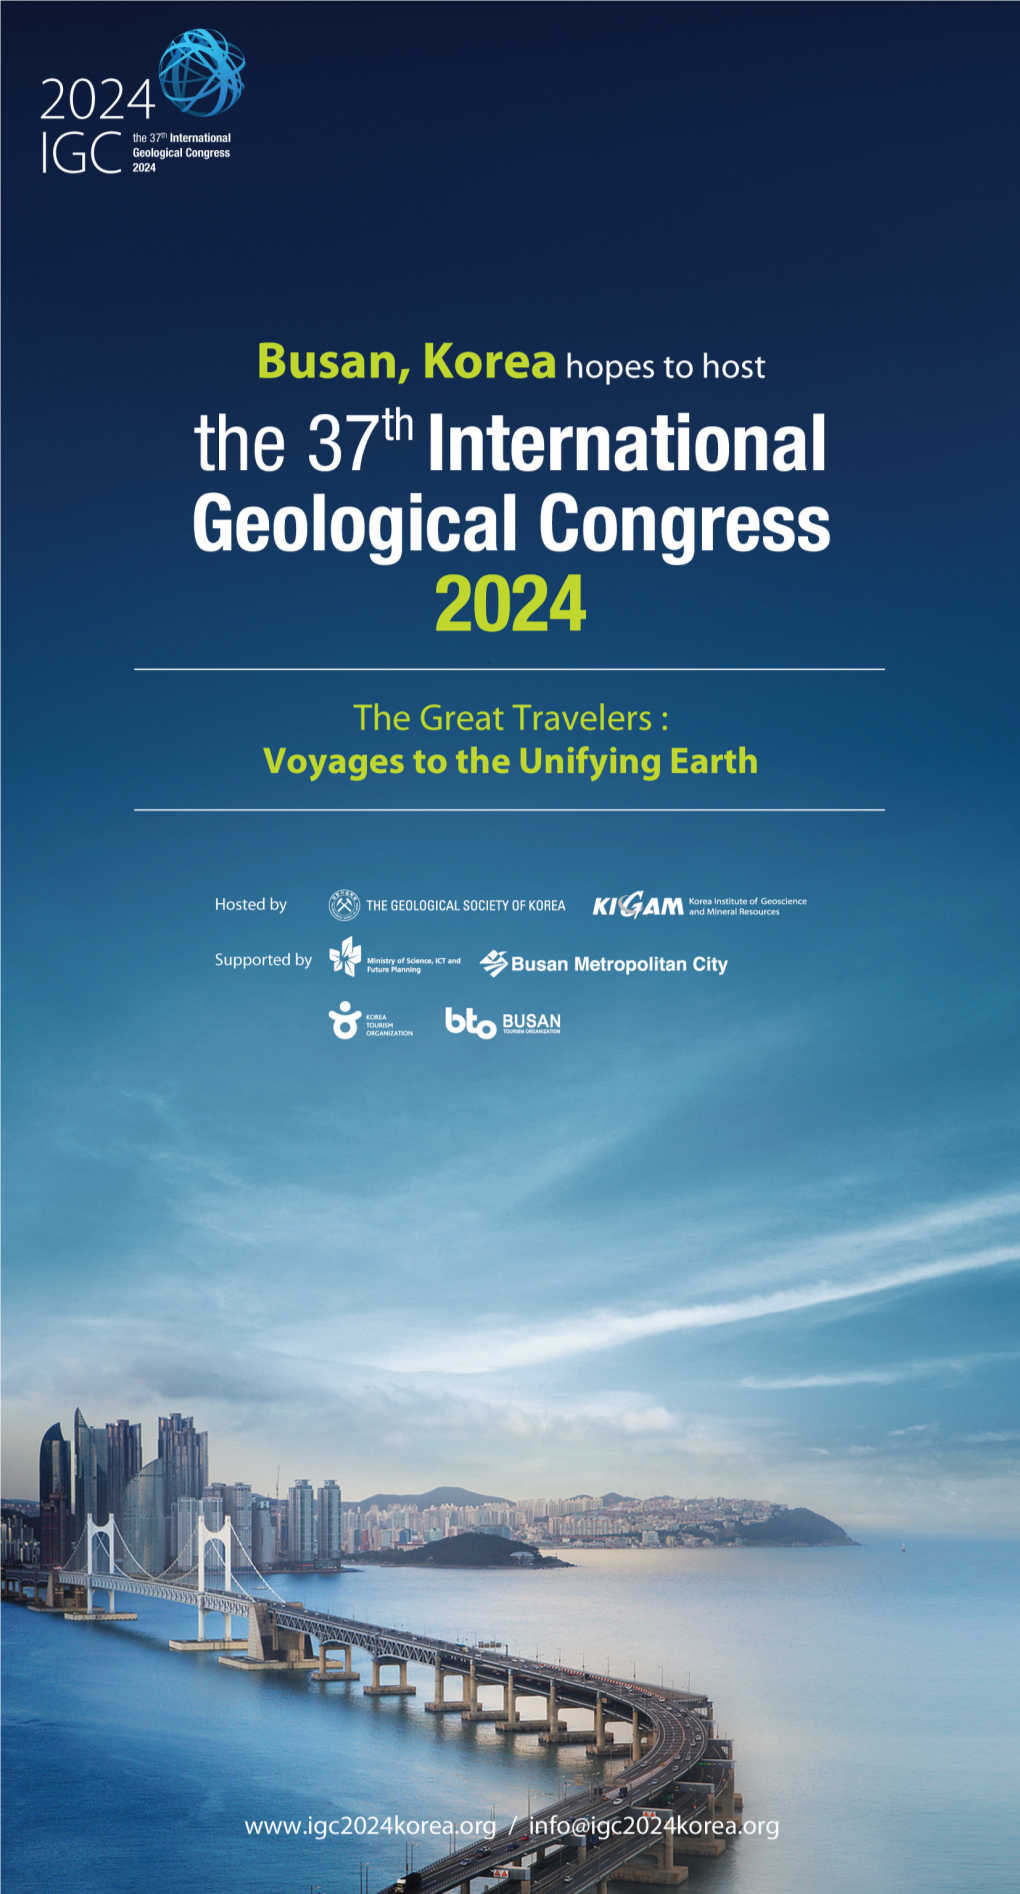 The Geological Society of Korea, I Am Delighted to Bid for the Honor of Hosting the 37Th International Geological Congress in Busan, South Korea, in 2024